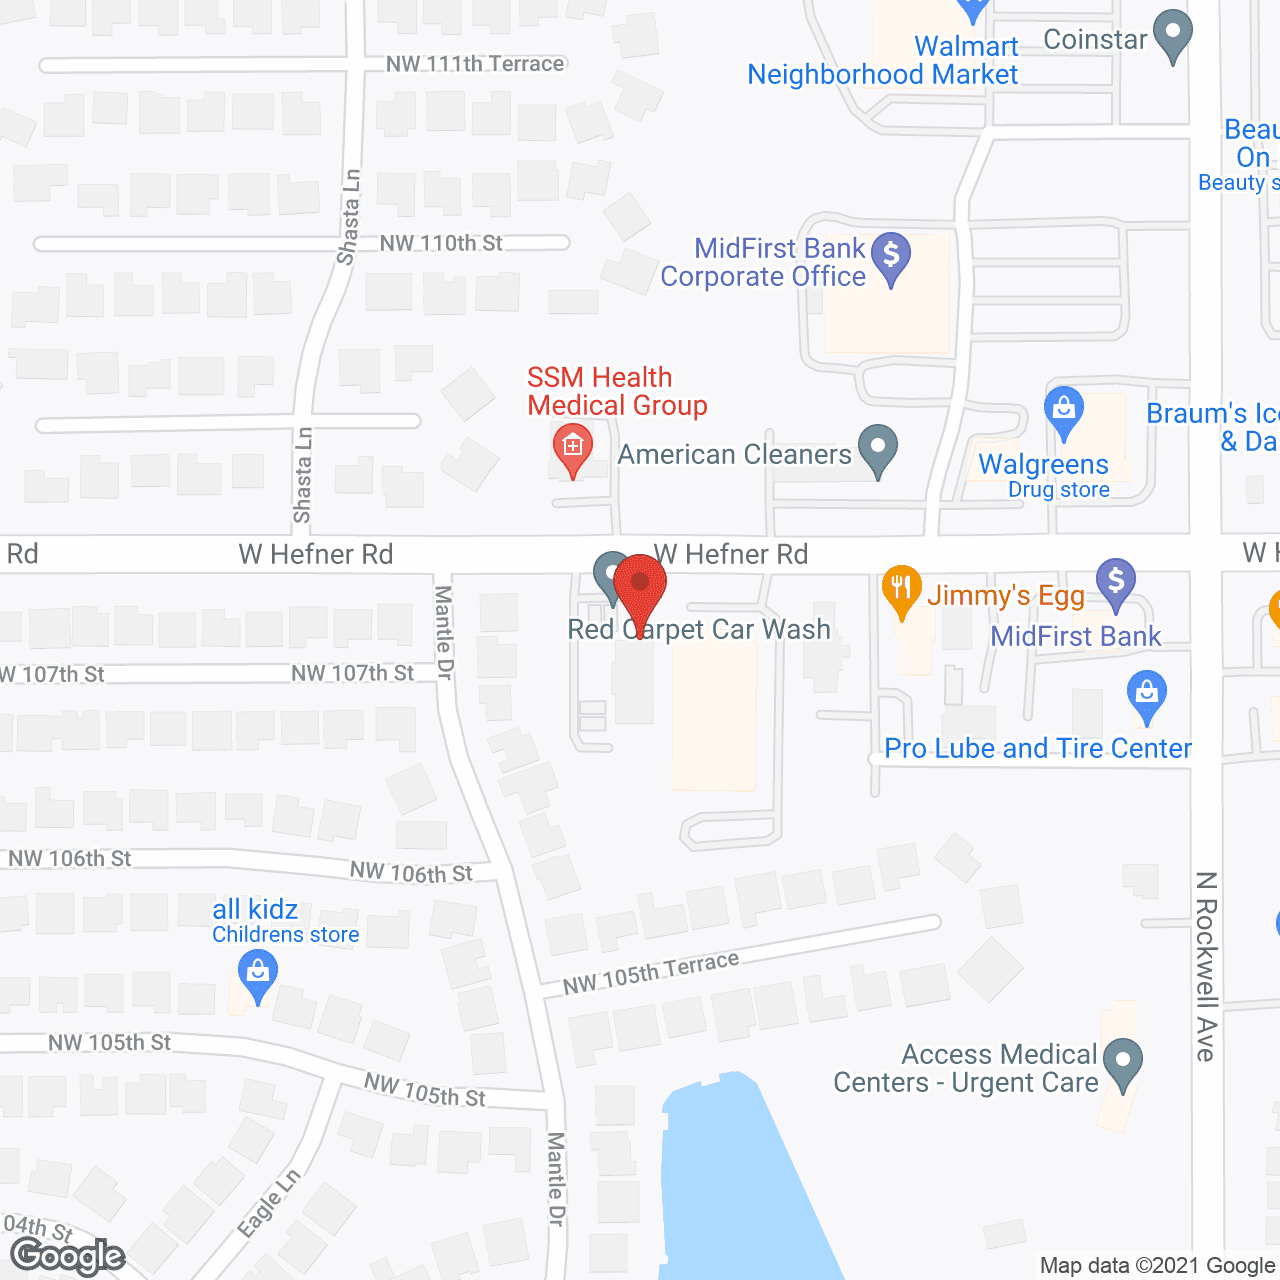 Superior Care Homes in google map